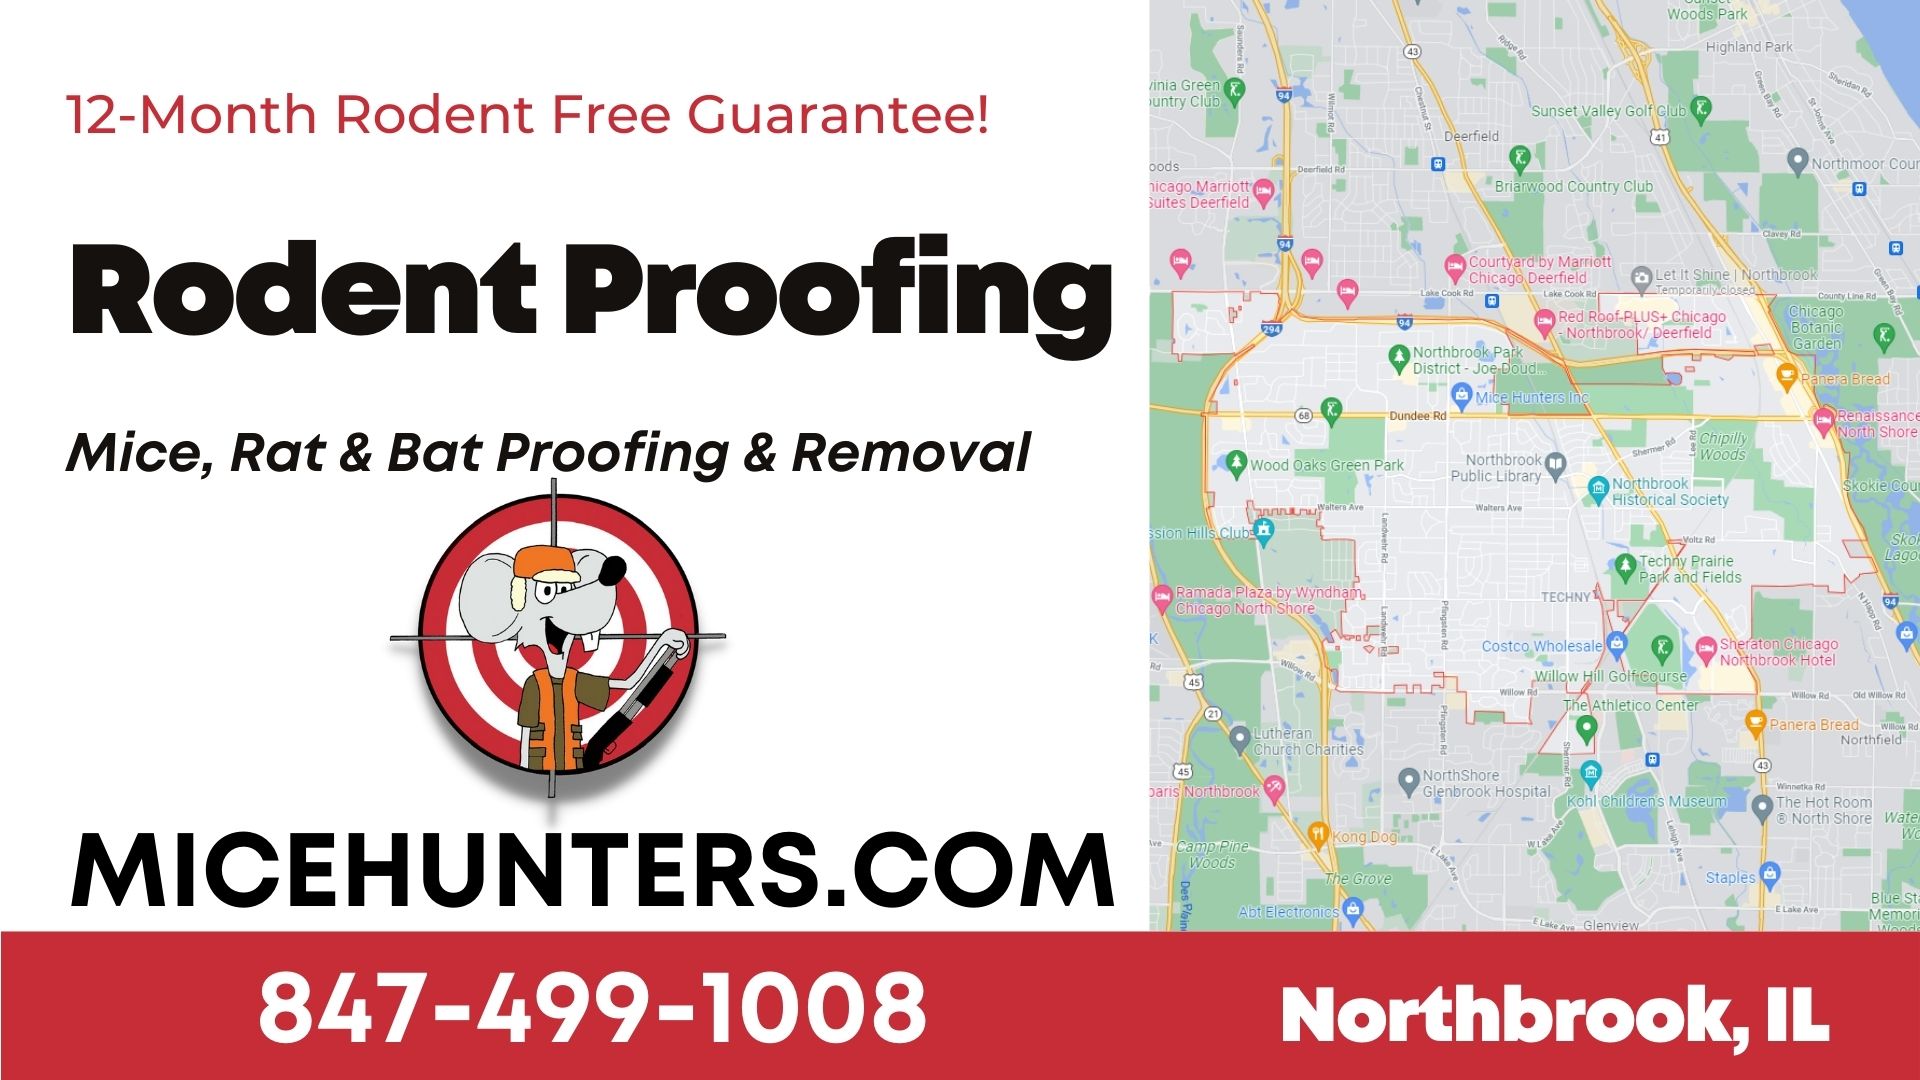 Northbrook Mice - Bat - Rat Removal Proofing Service